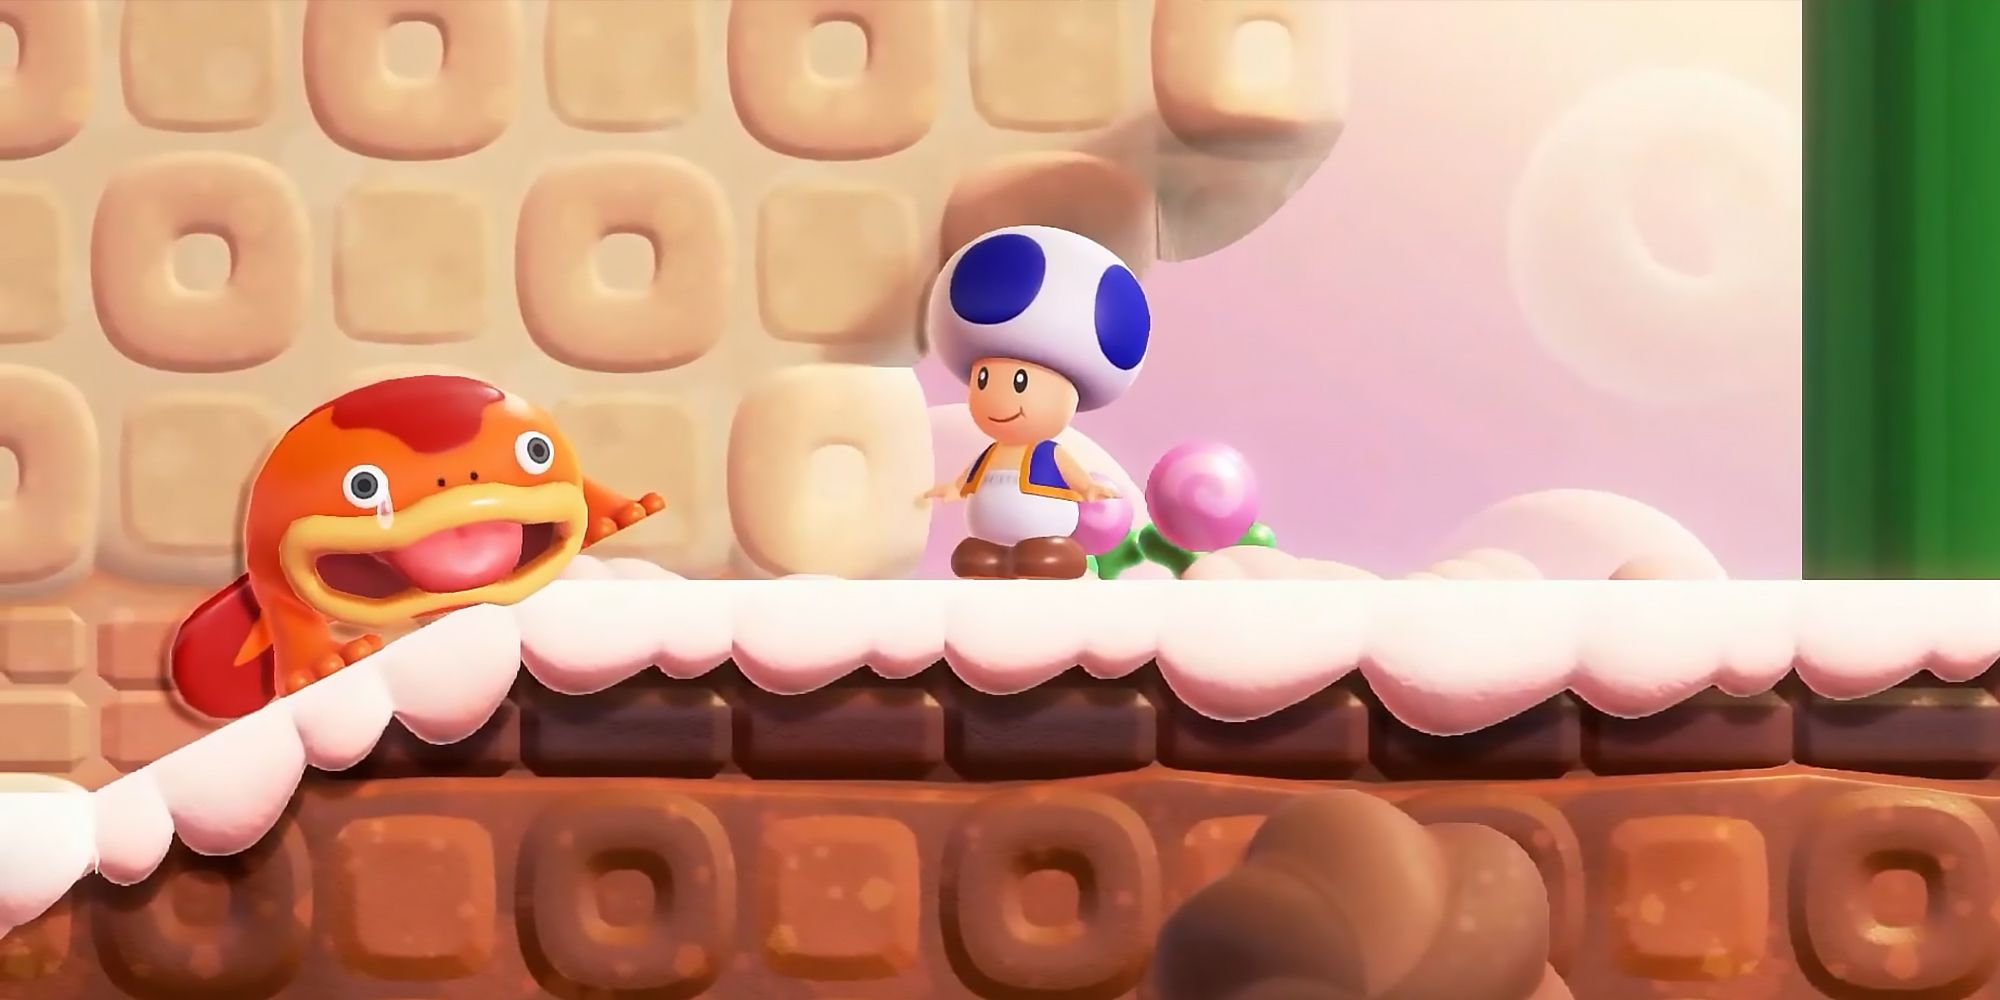 All New Enemies and Power-ups In Super Mario Bros. Wonder